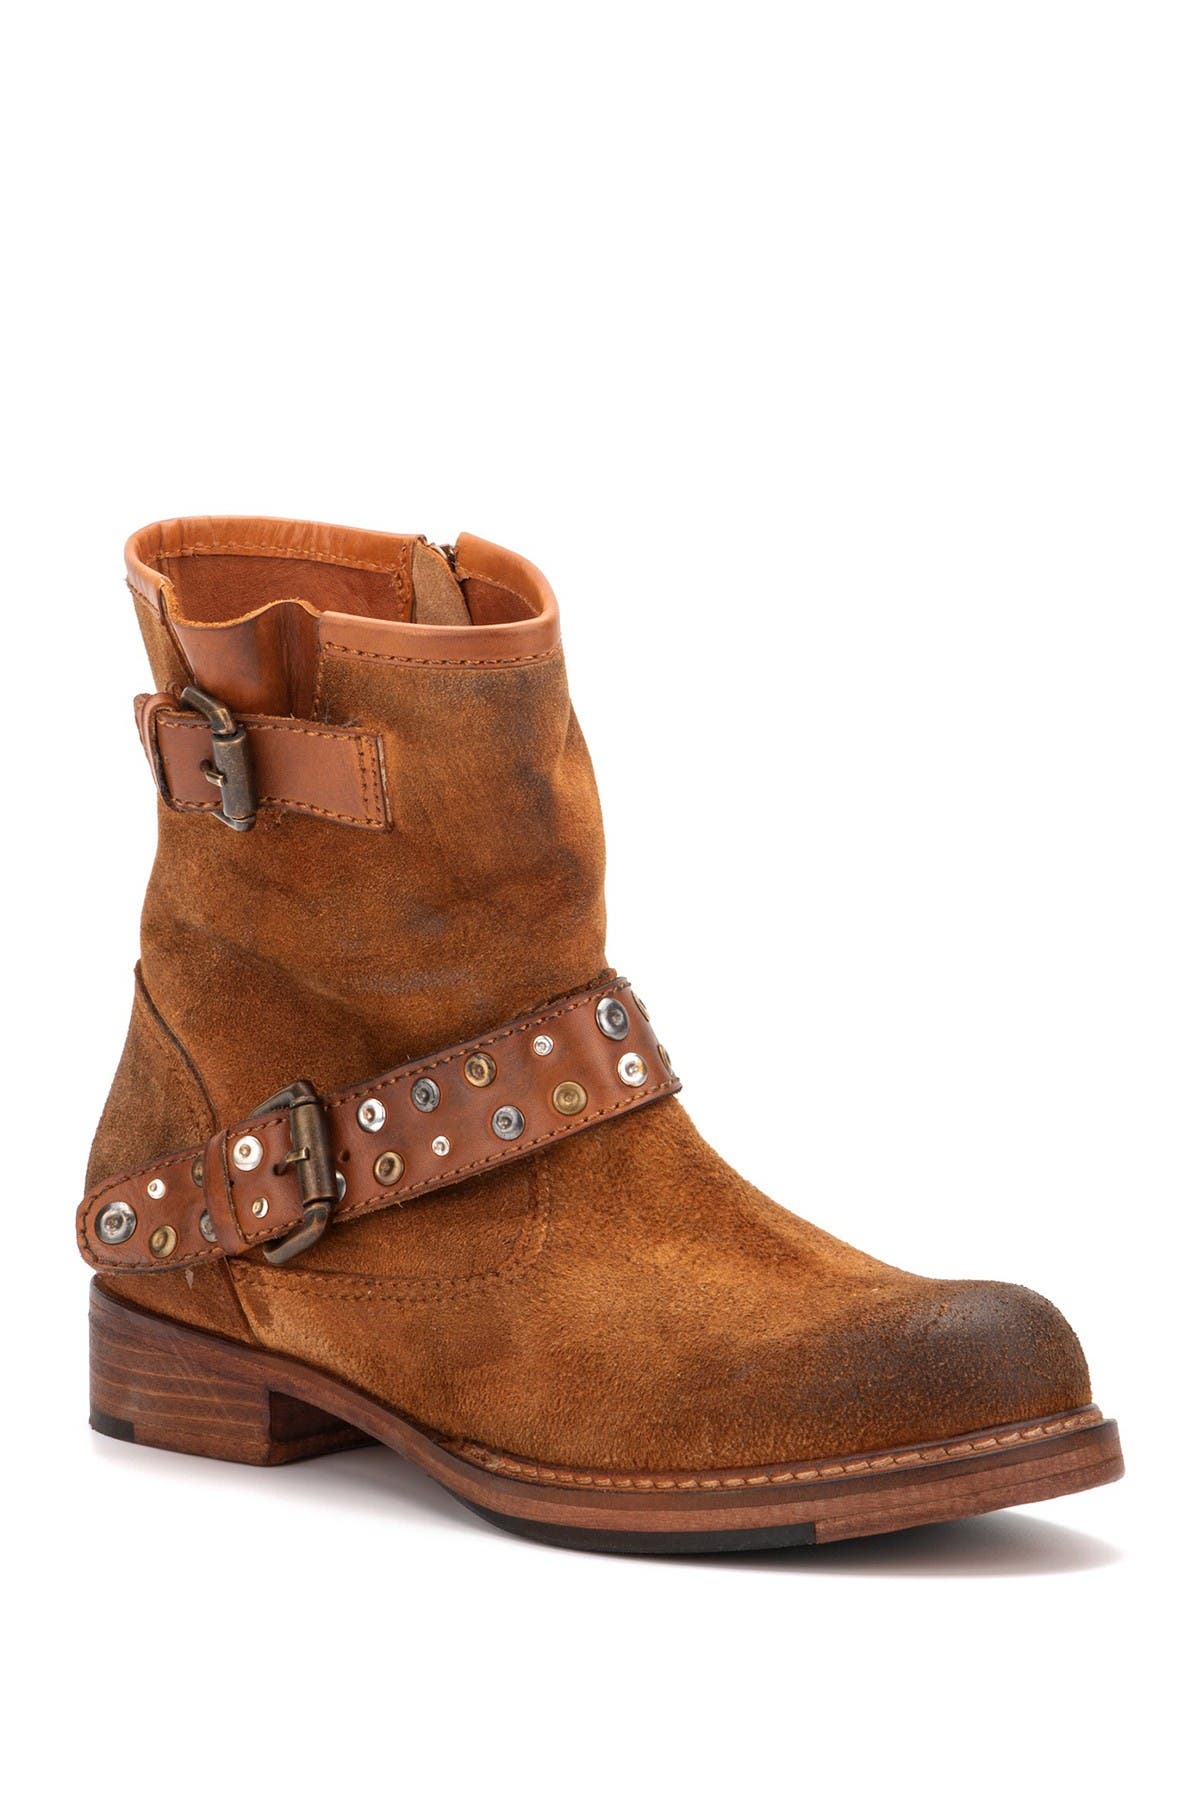 nordstrom studded boots